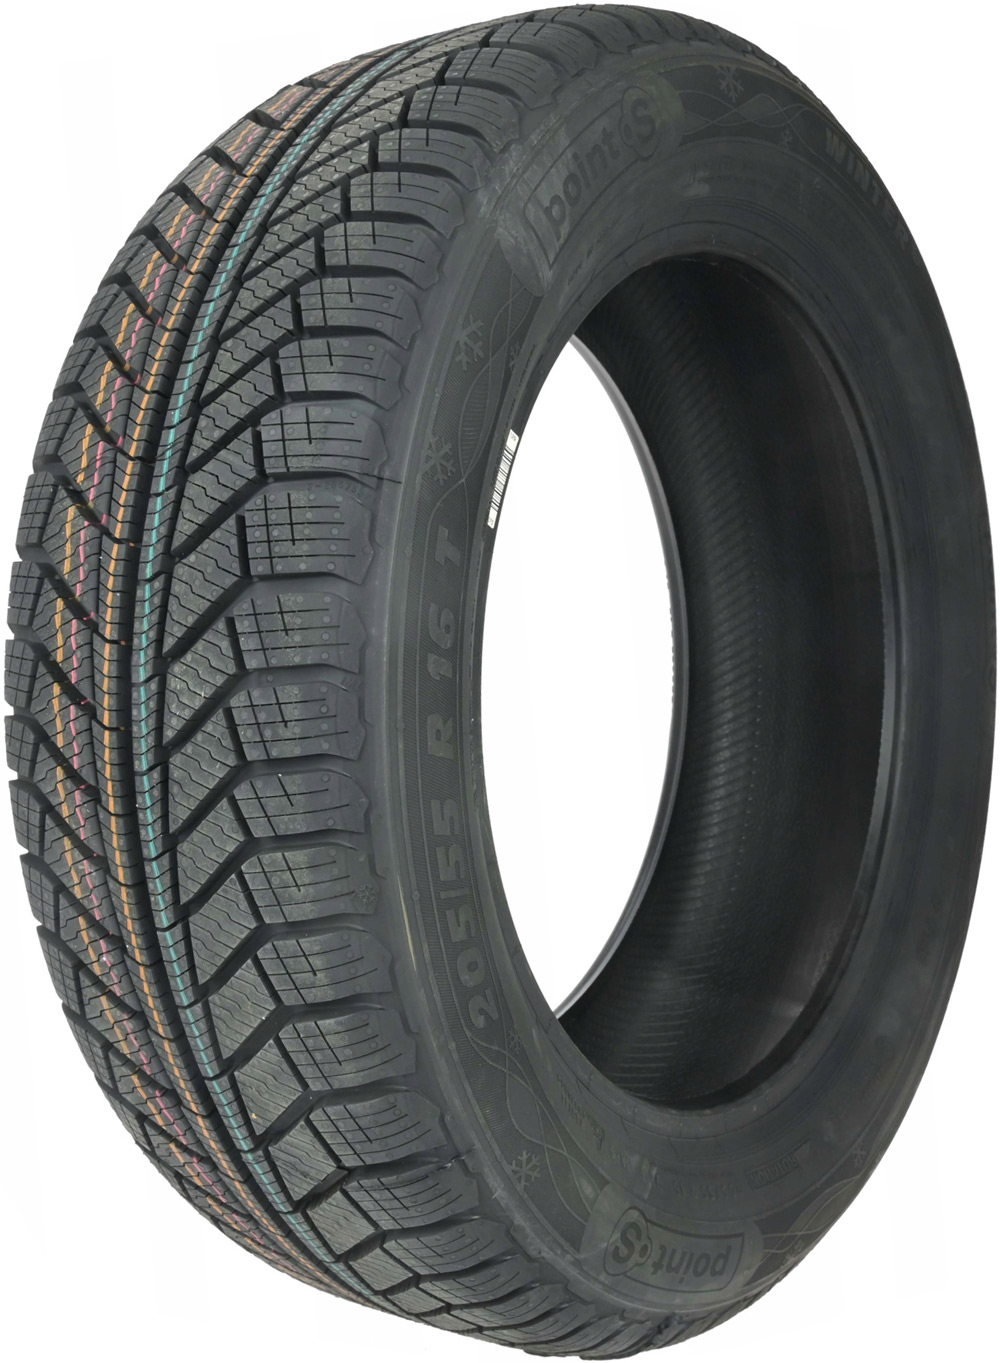 Anvelope auto POINT S WINTER S XL FP 245/45 R18 100V